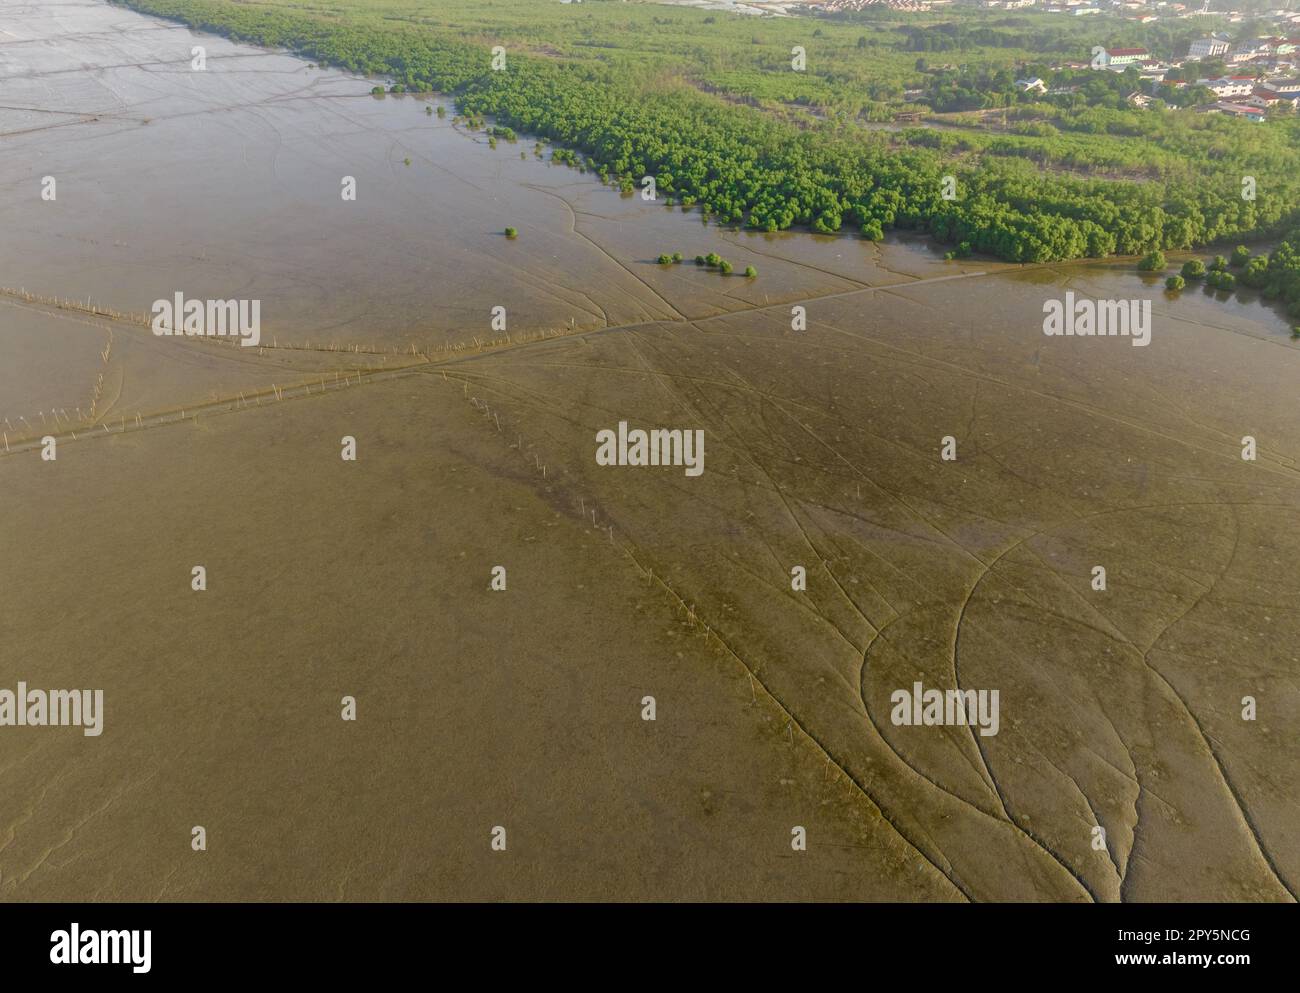 Green mangrove forest with morning sunlight. Mangrove ecosystem. Natural carbon sinks. Mangroves capture CO2 from the atmosphere. Blue carbon ecosystems. Mangroves absorb carbon dioxide emissions. Stock Photo